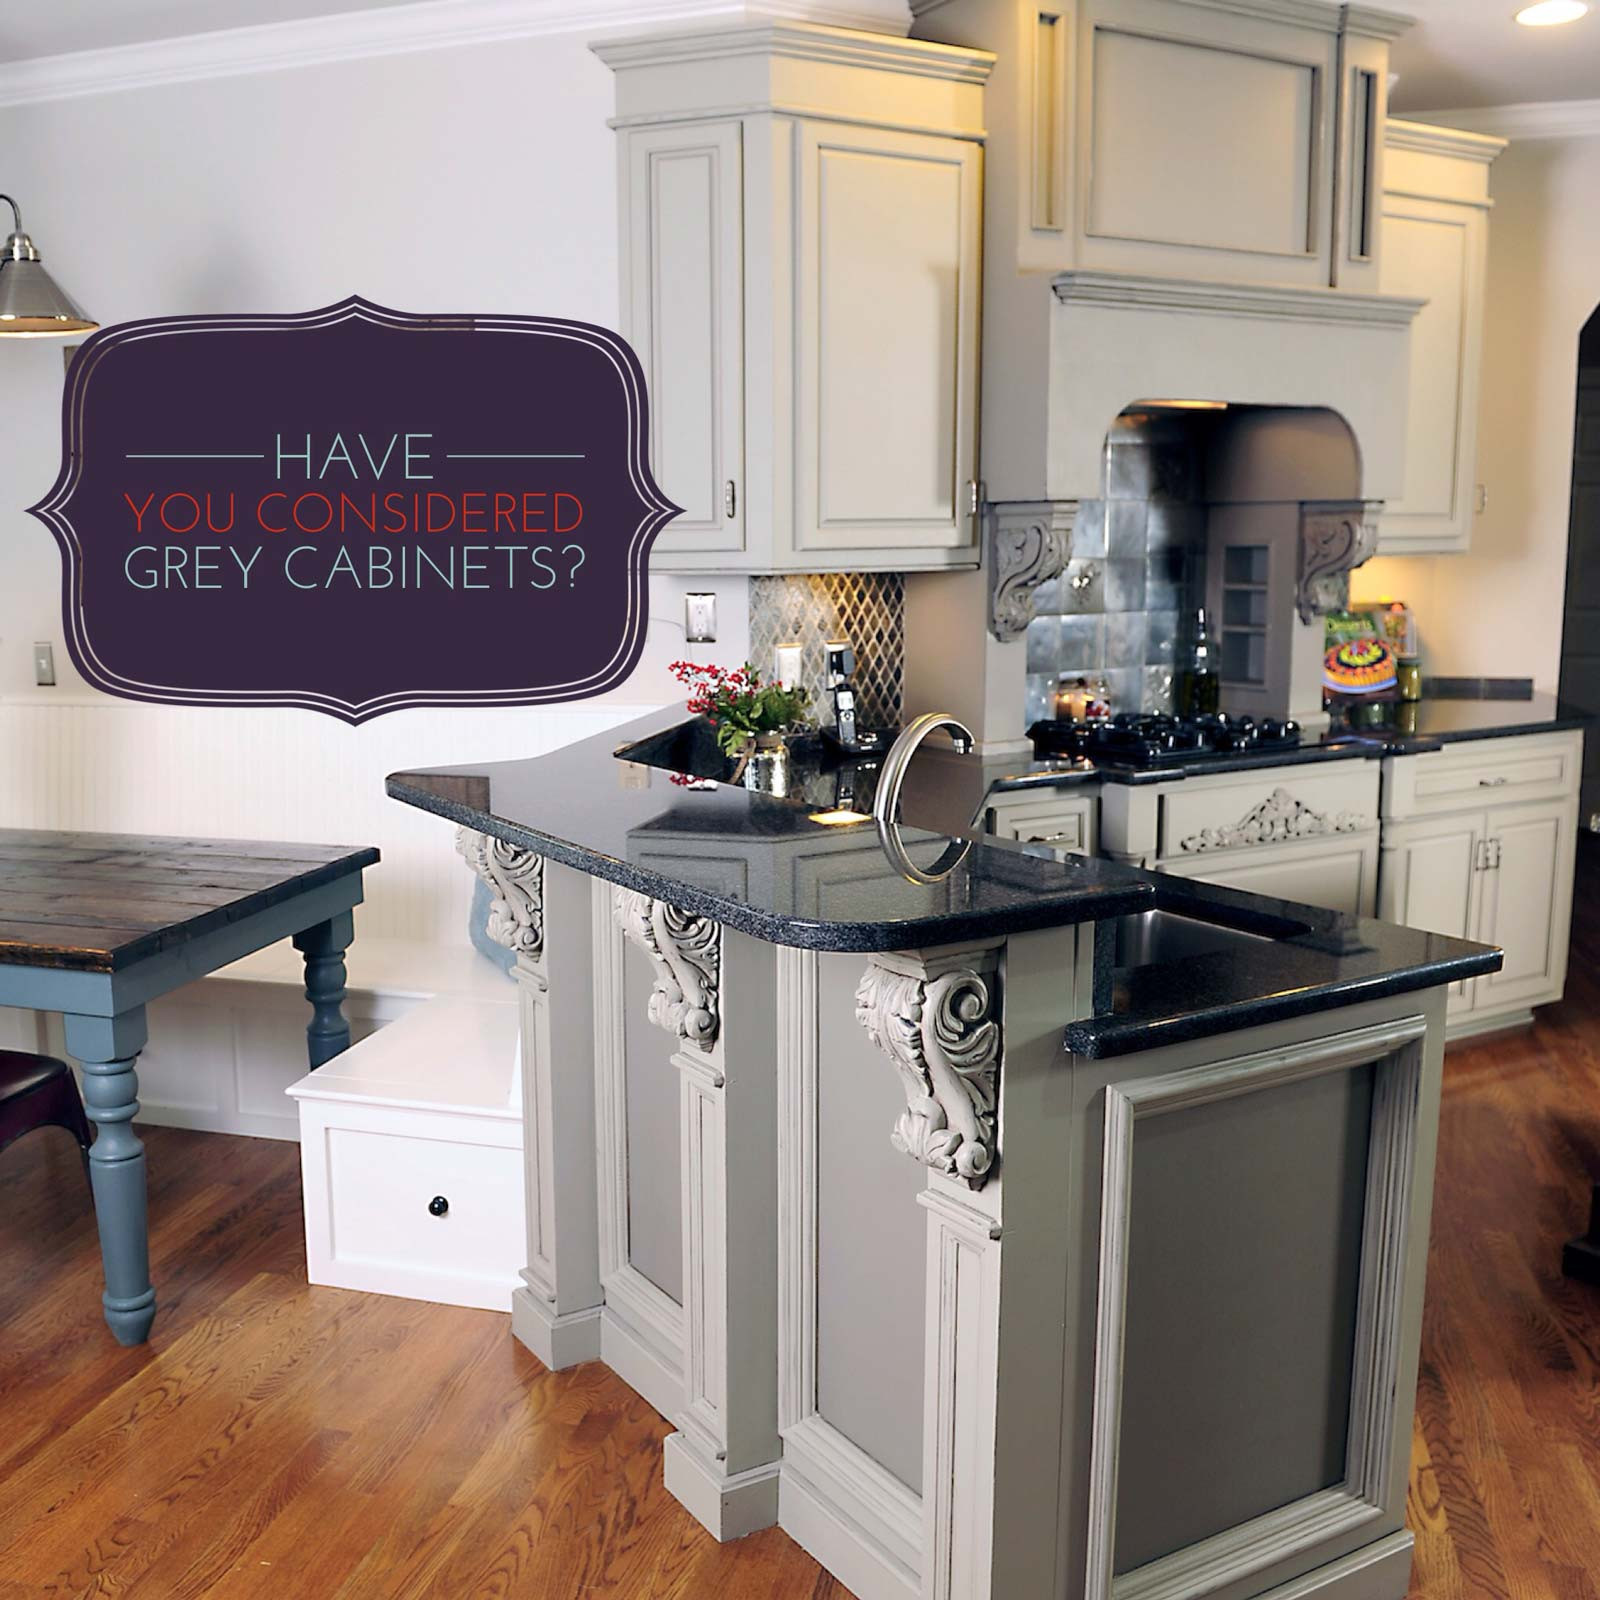 Grey Cabinets Kitchen
 Have you considered Grey Kitchen Cabinets